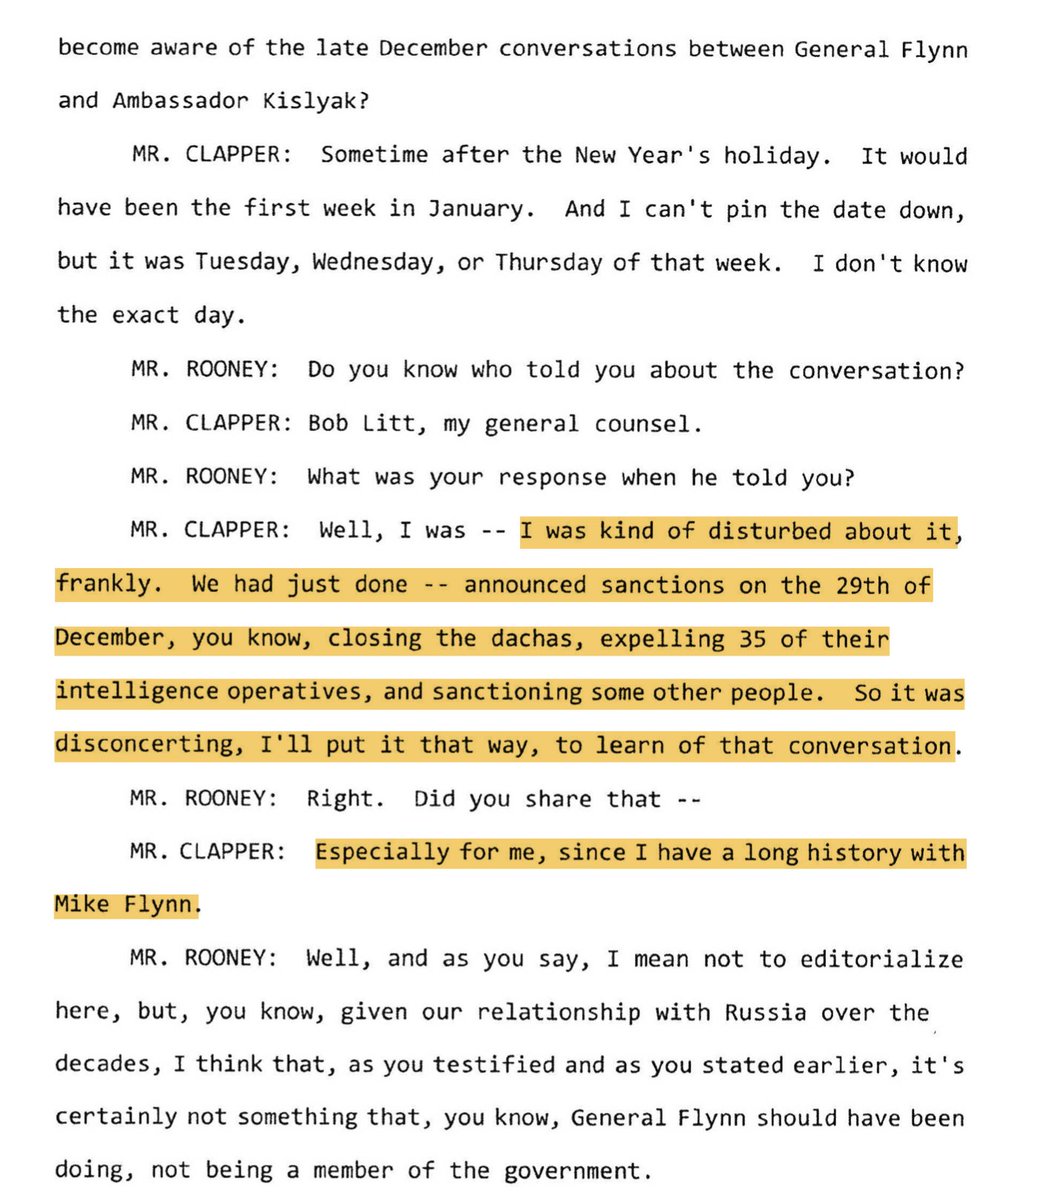 ROONEY: When did you learn about Flynn and Kislyak?CLAPPER: Few days after. What an asshole. I used to run DIA too, but I'm not a traitor.ROONEY: Yeah...I guess that does look bad.